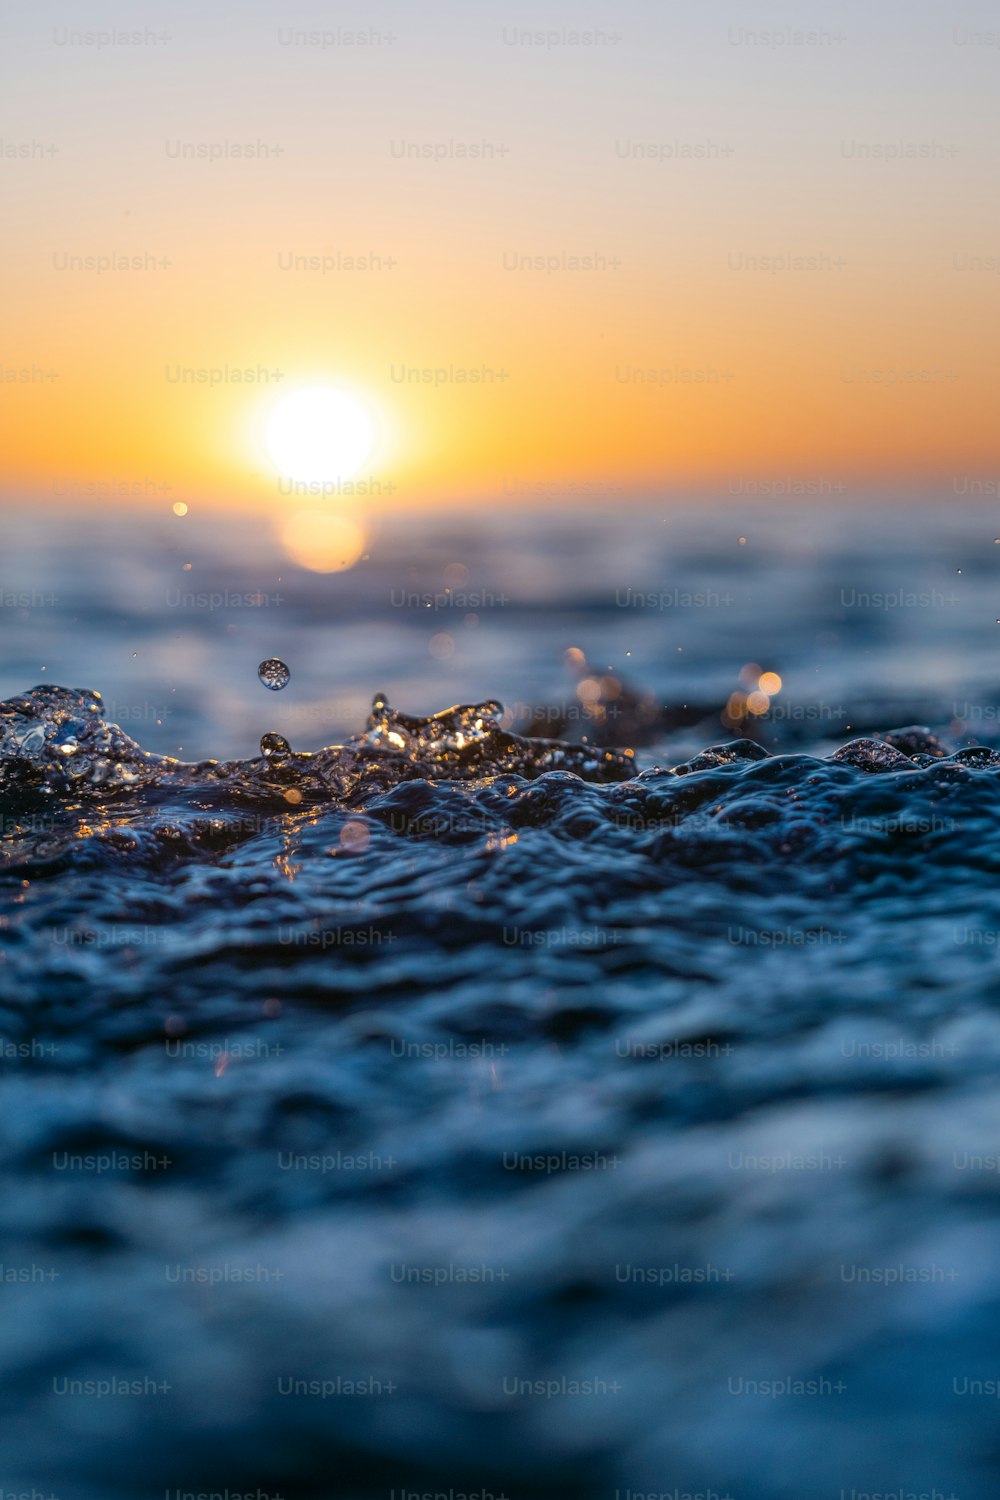 a group of water droplets on a surface with the sun in the background